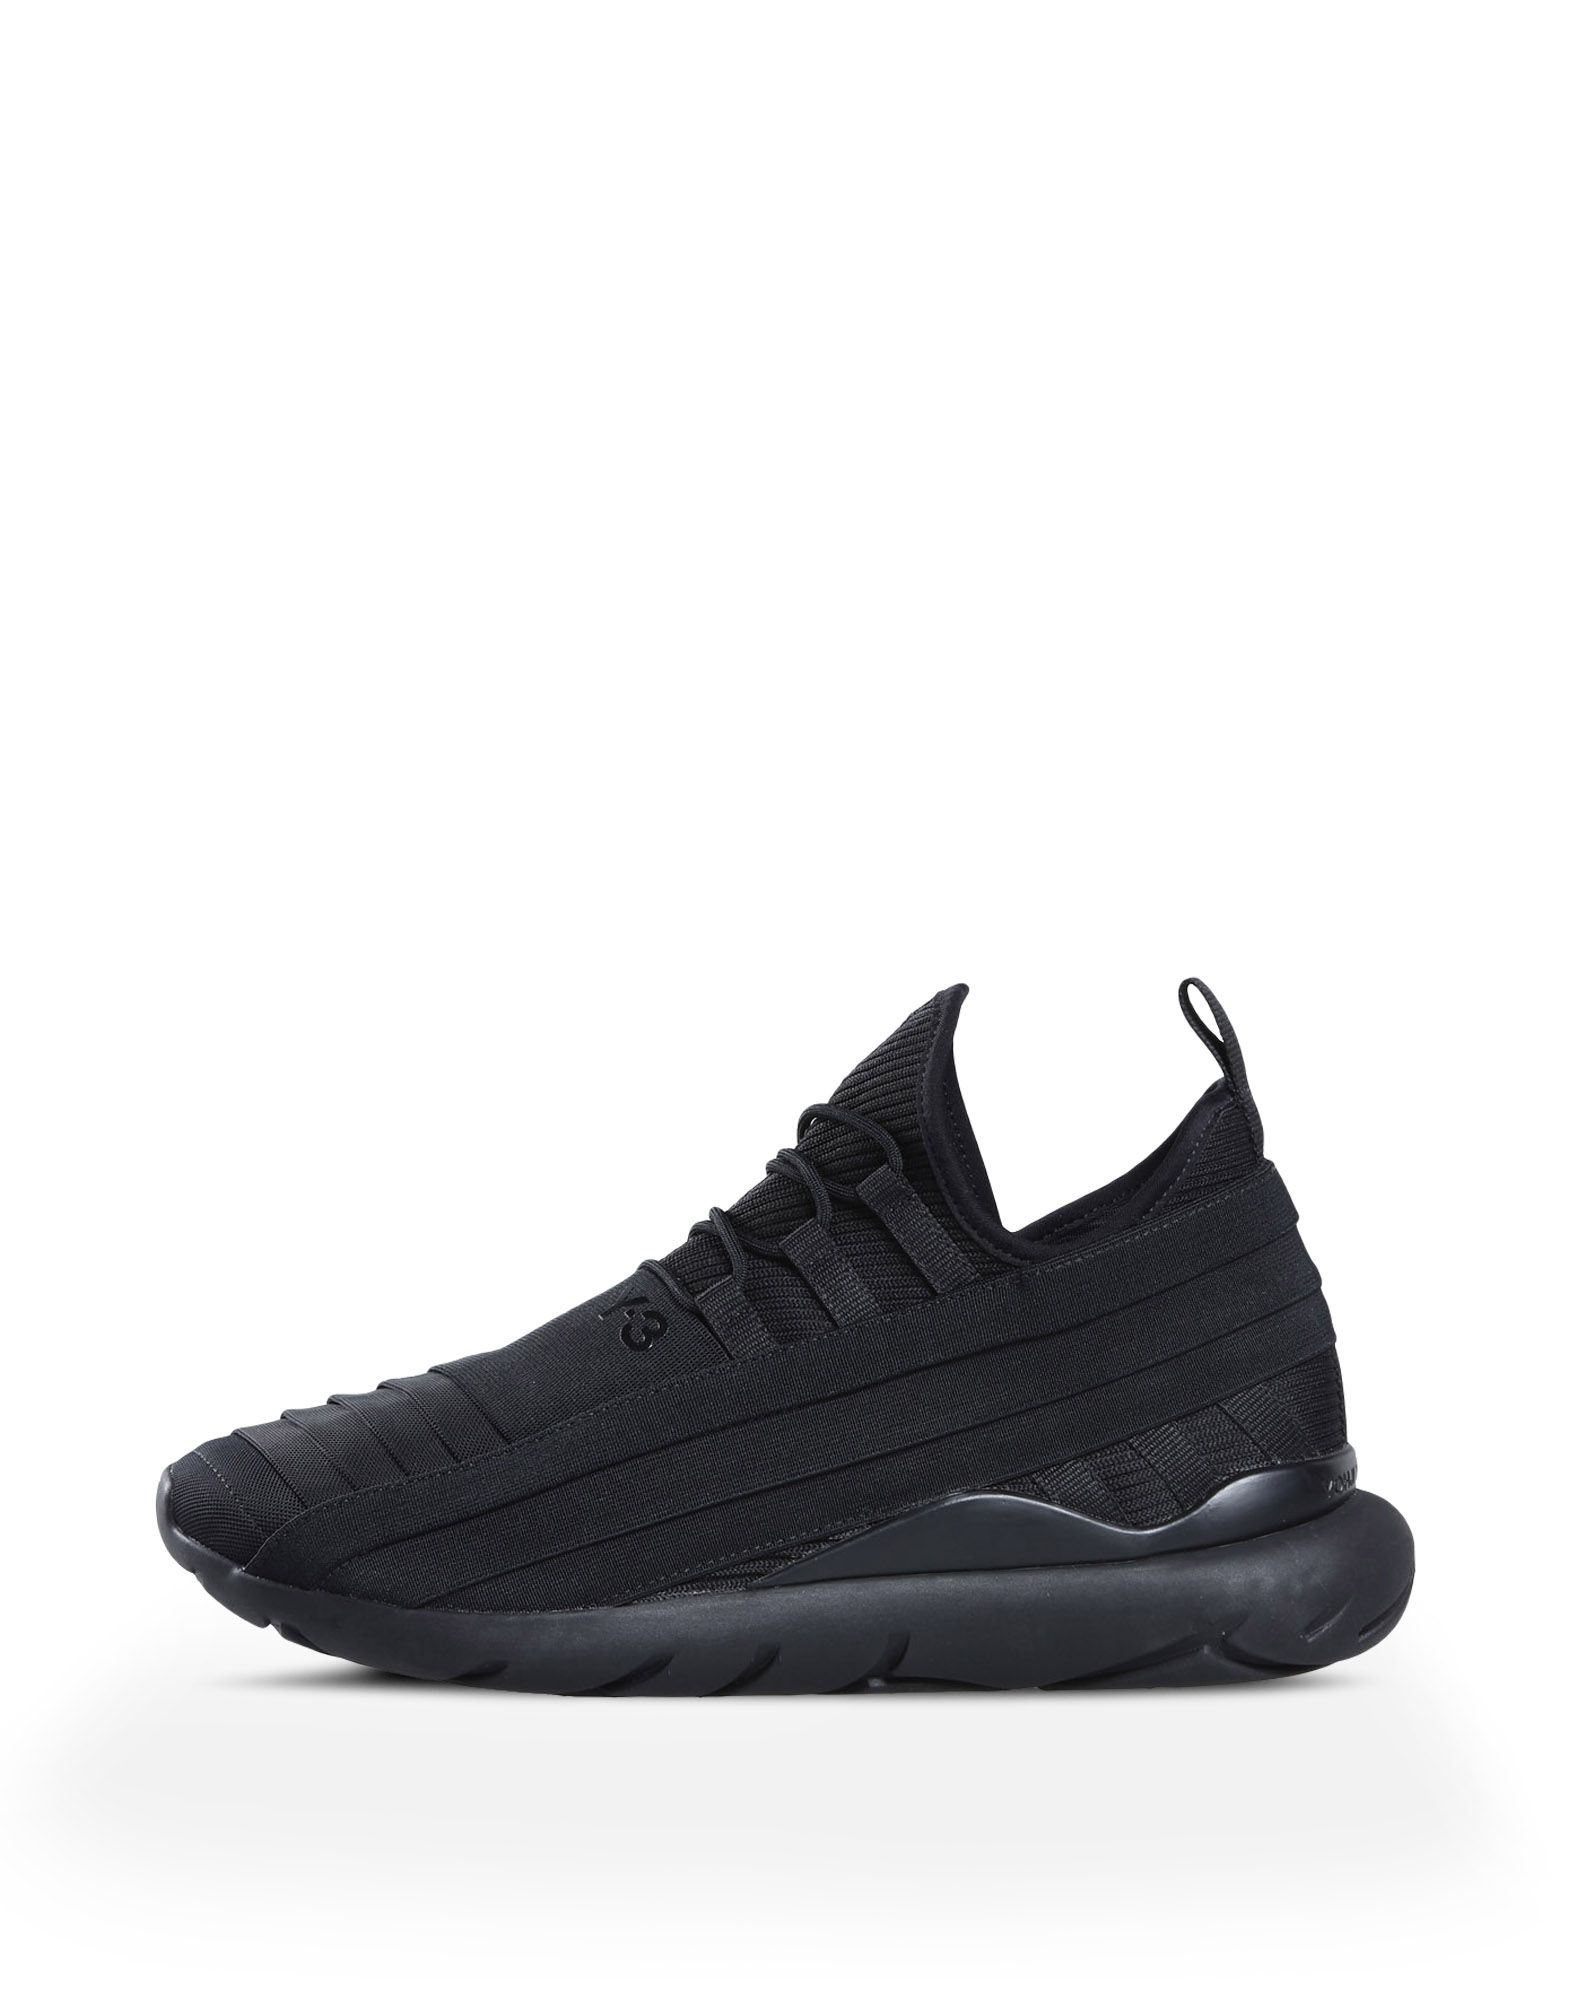 Y-3 Qasa Lace 2.0 Sneakers in Black for Women | Adidas Y-3 Official Store